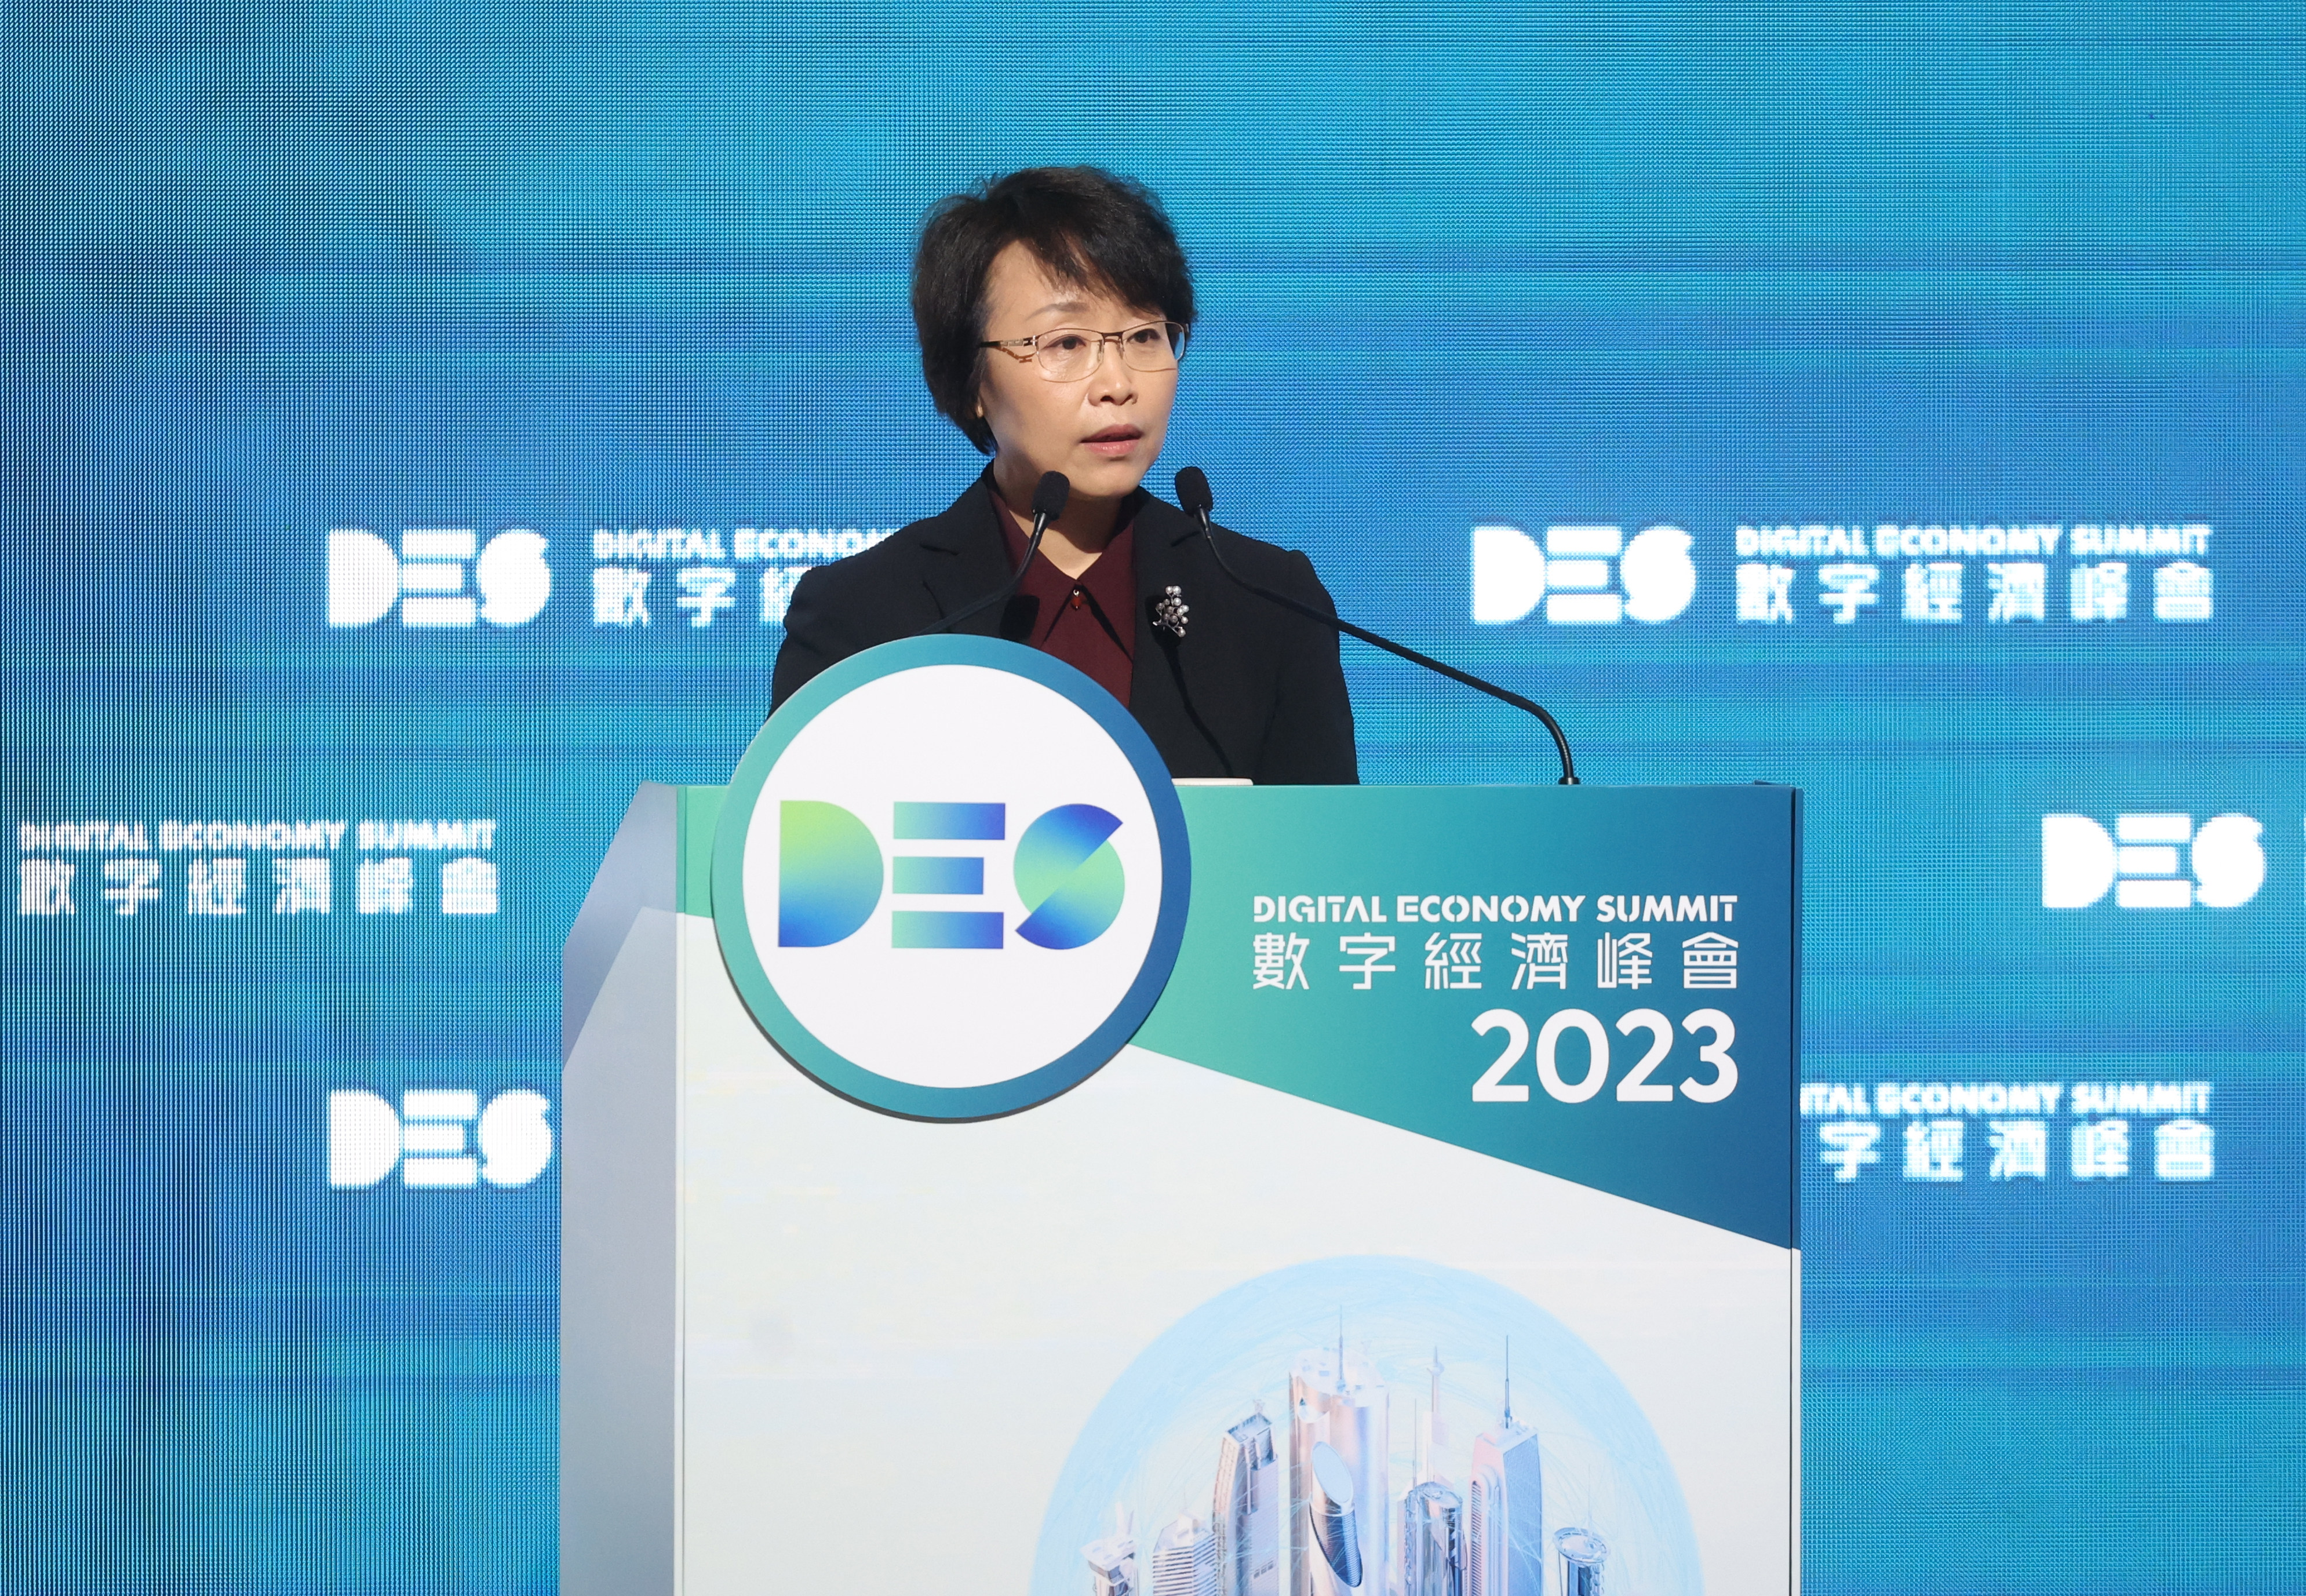 Cao Shumin, deputy director at the Cyberspace Administration of China, speaking at the Digital Economy Summit 2023 in Hong Kong on April 13, 2023. Photo: Yik Yeung-man